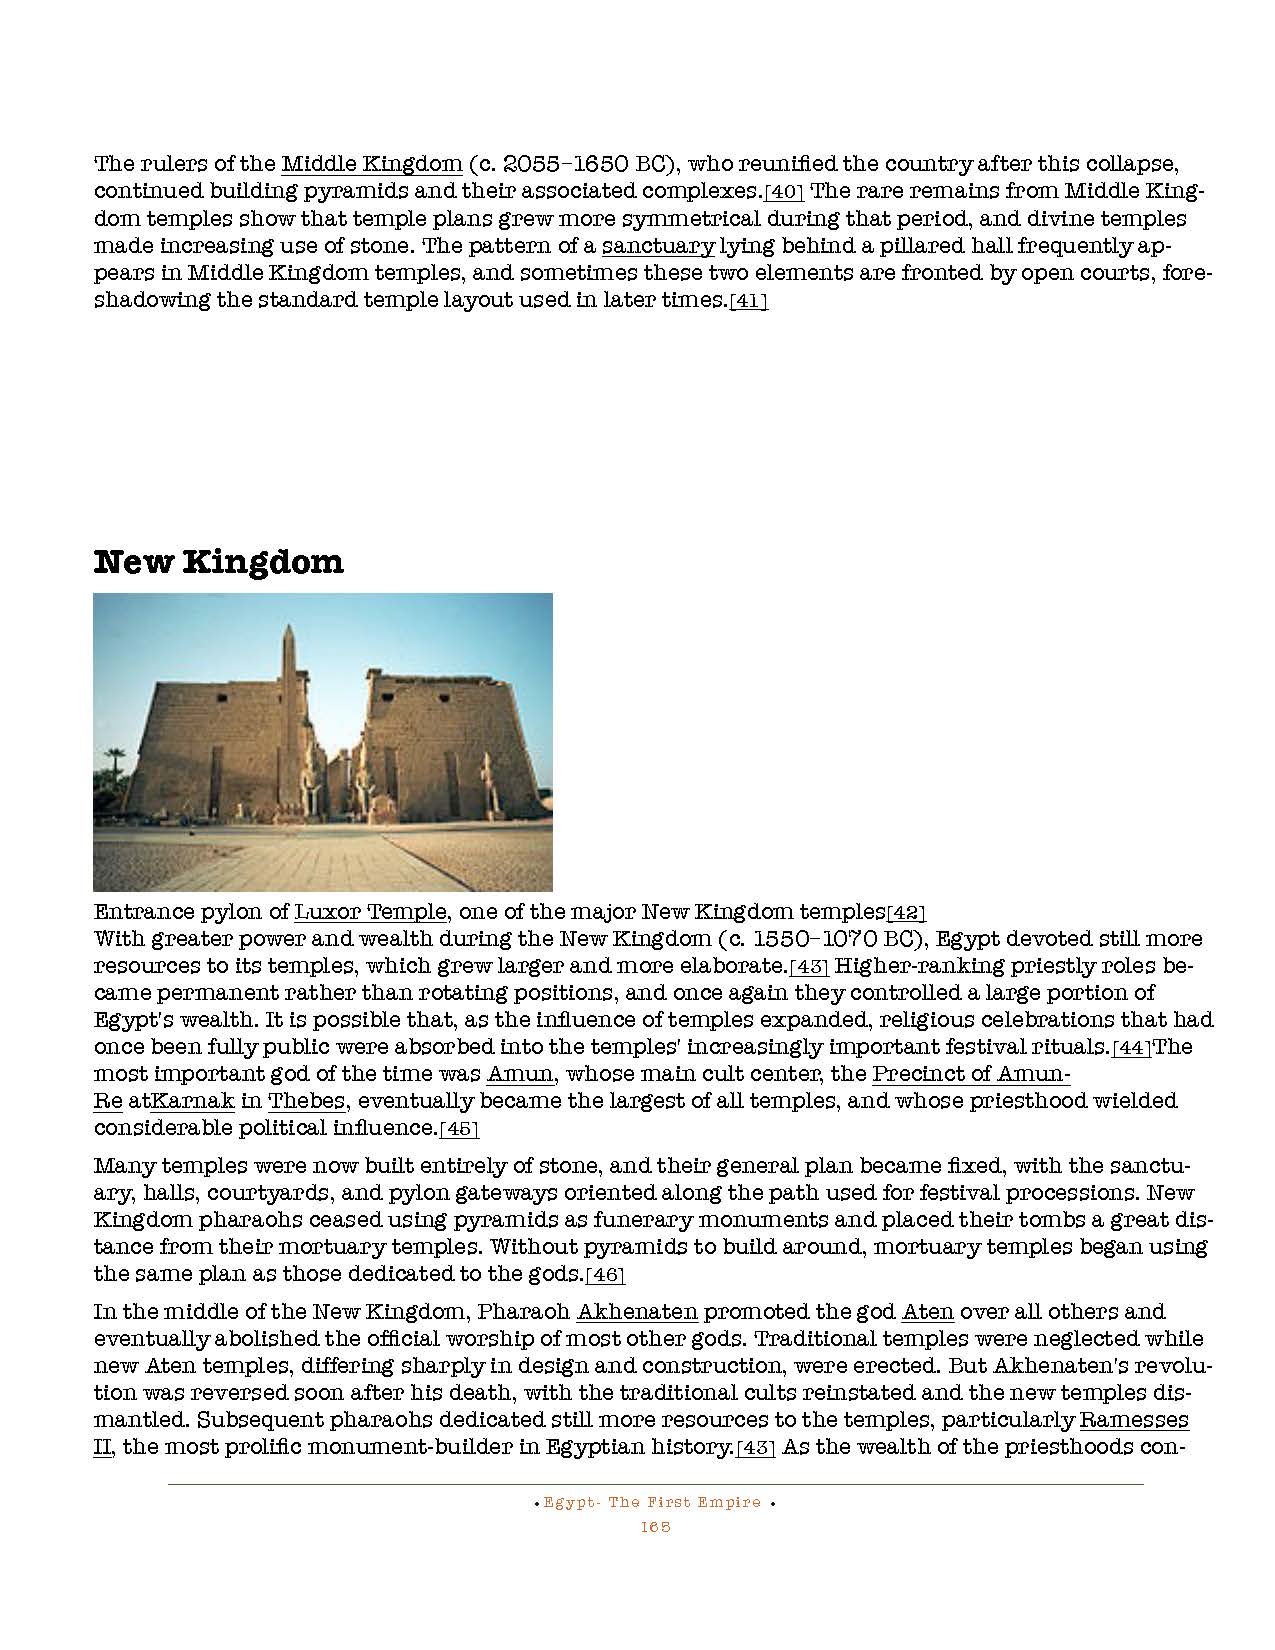 HOCE- Egypt  (First Empire) Notes_Page_165.jpg